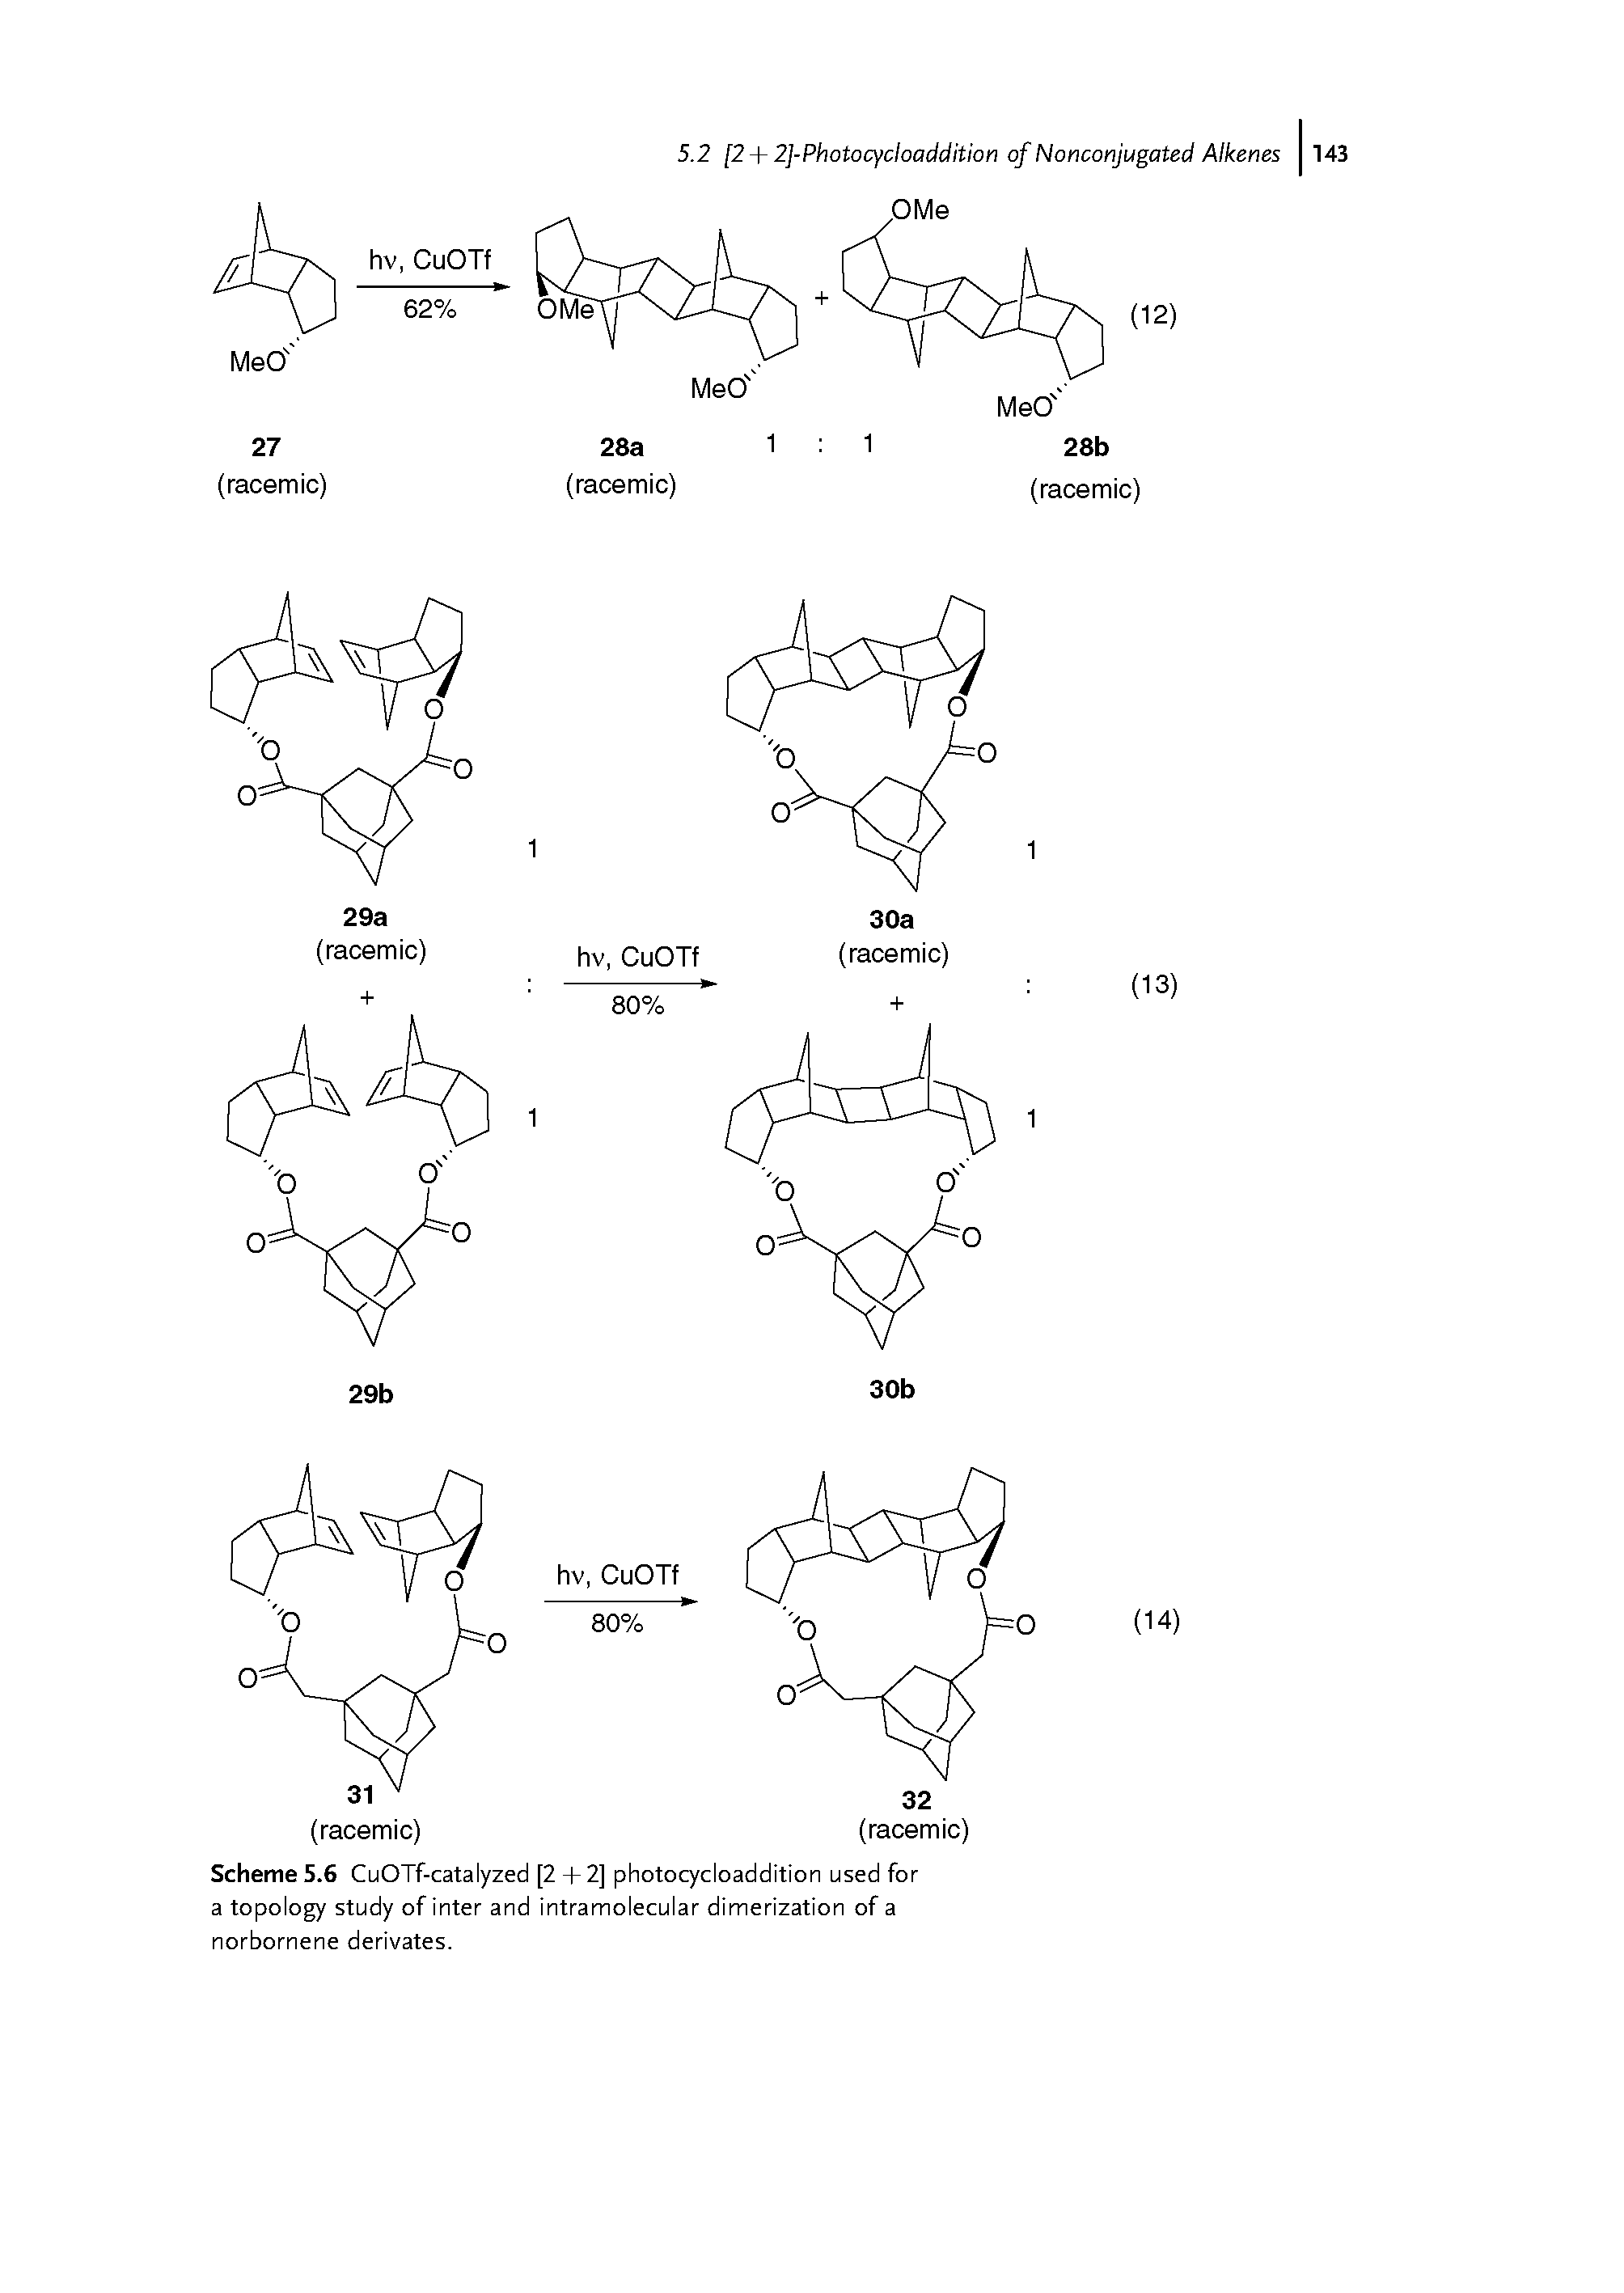 Scheme 5.6 CuOTf-catalyzed [2 + 2] photocycloaddition used for a topology study of inter and intramolecular dimerization of a norbornene derivates.